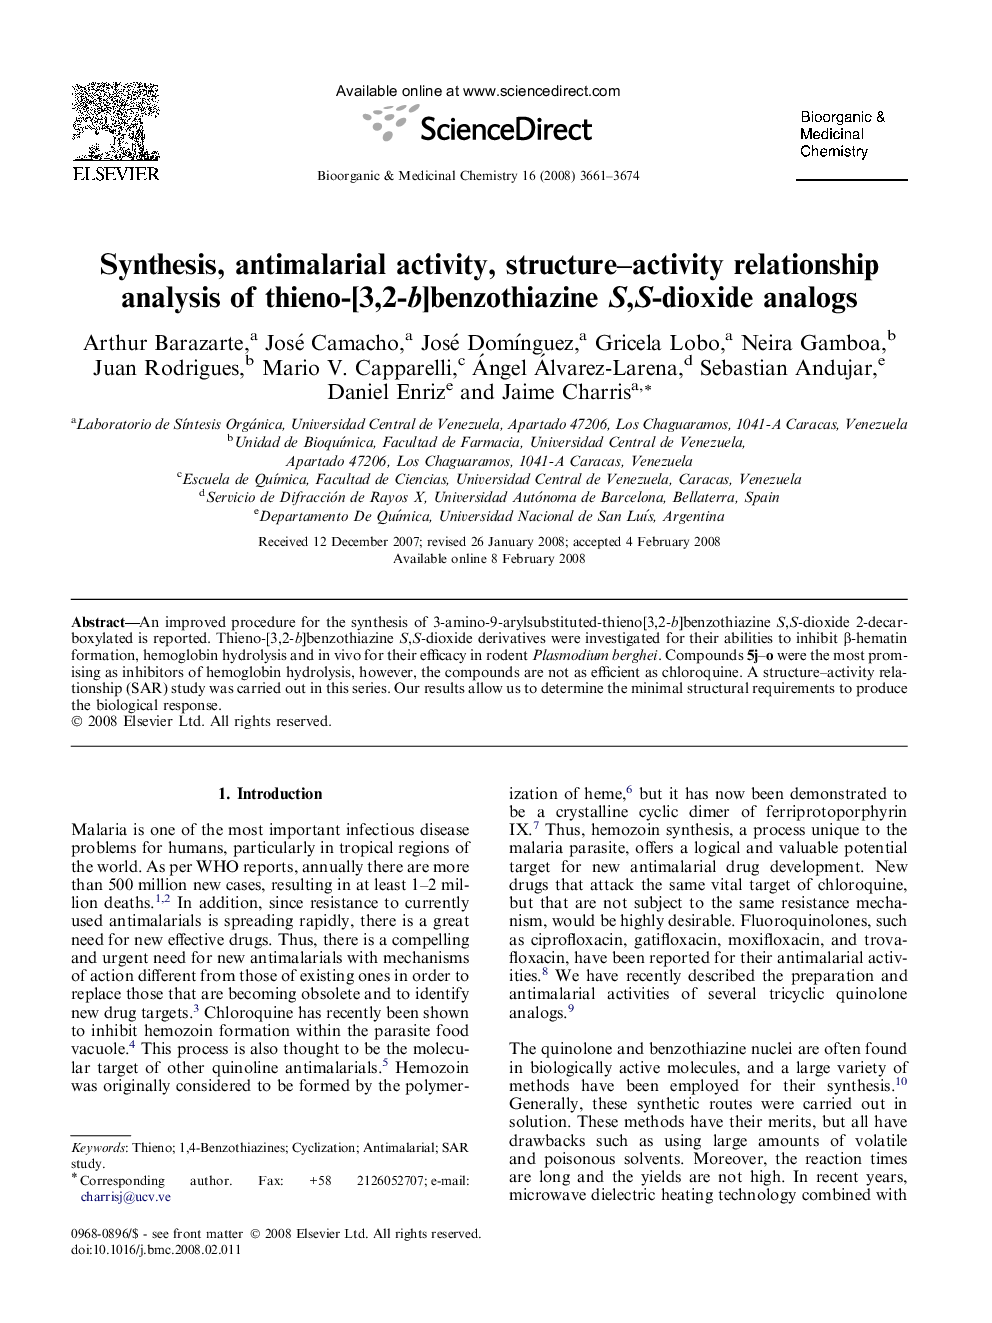 Synthesis, antimalarial activity, structure-activity relationship analysis of thieno-[3,2-b]benzothiazine S,S-dioxide analogs